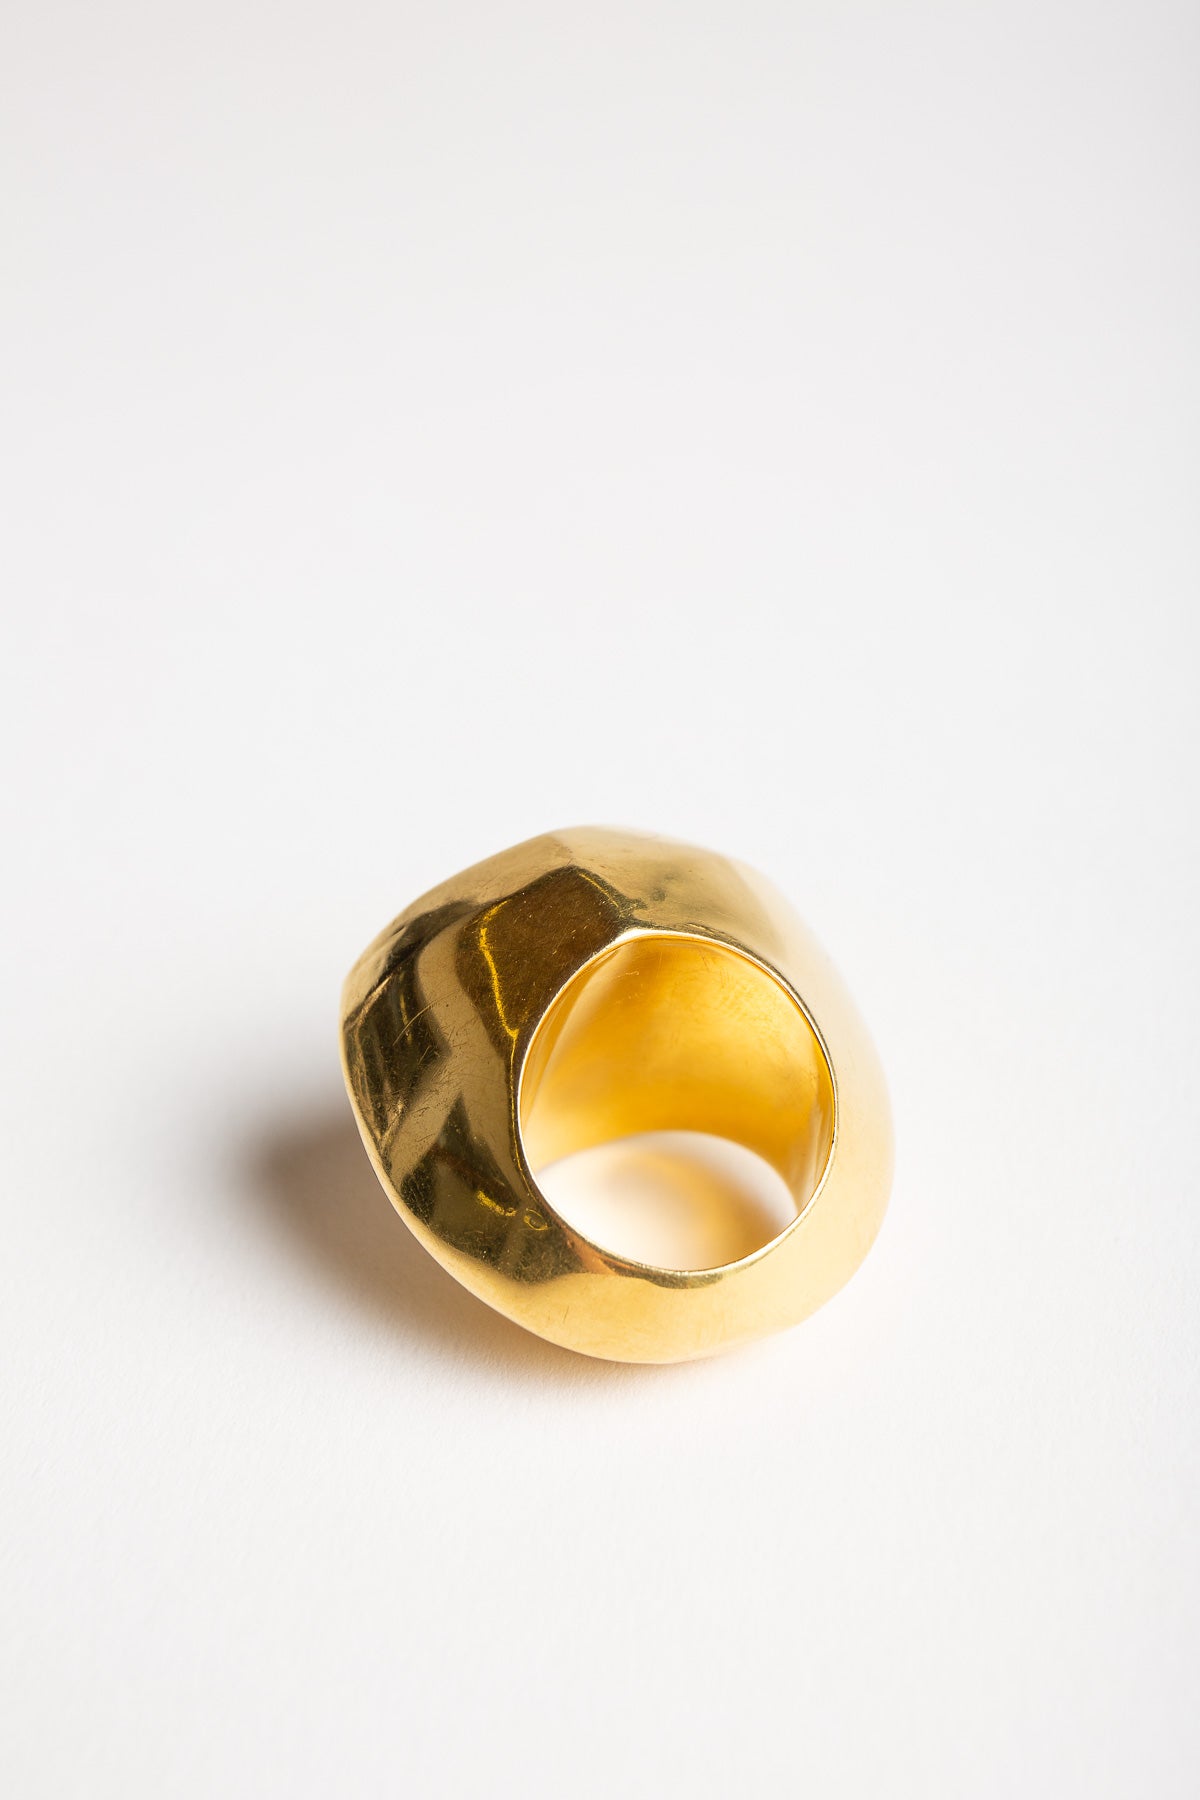 MAXFIELD PRIVATE COLLECTION | 1970'S MODERNIST 18K RING